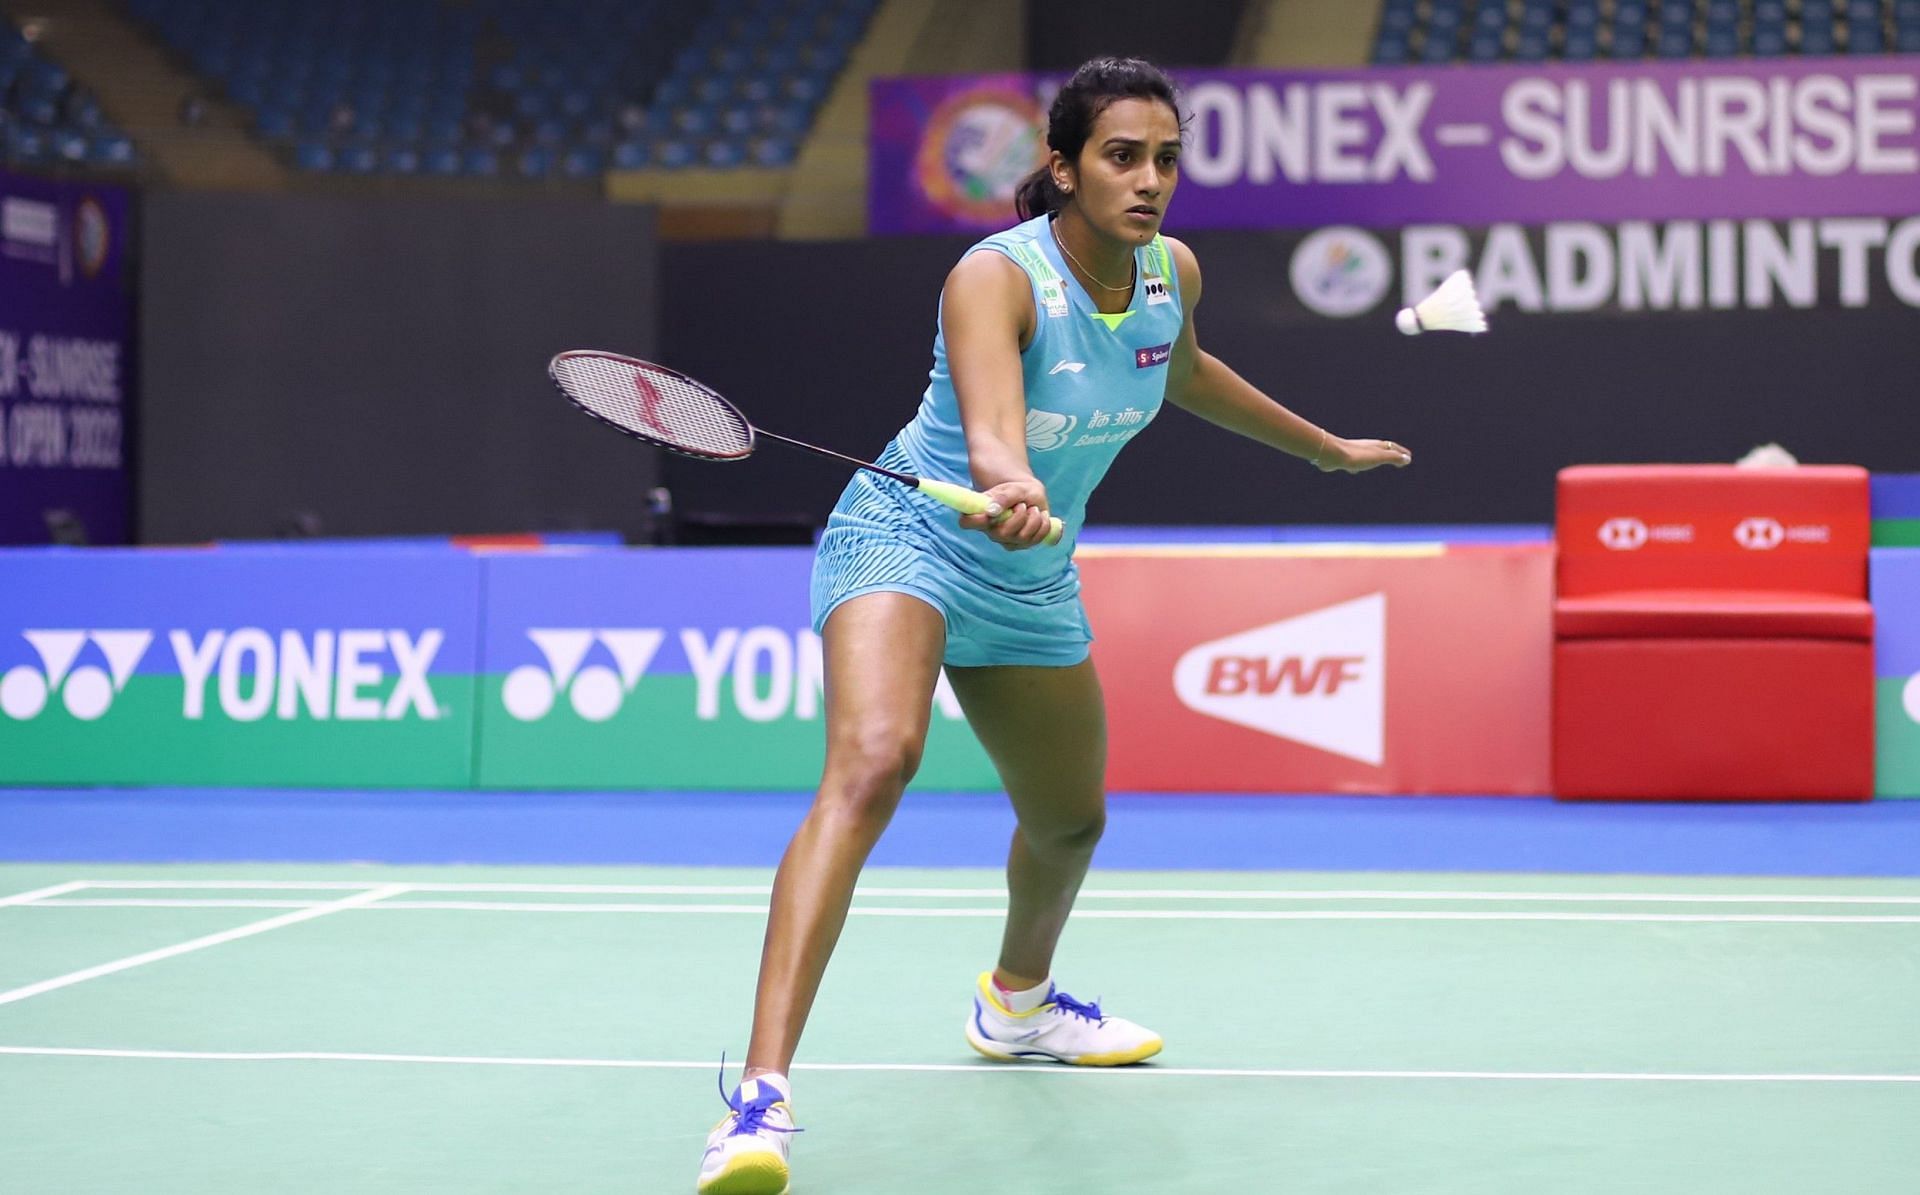 PV Sindhu will be one of the star attractions in the forthcoming sixth edition of the PBL (Pic credits: BAI)